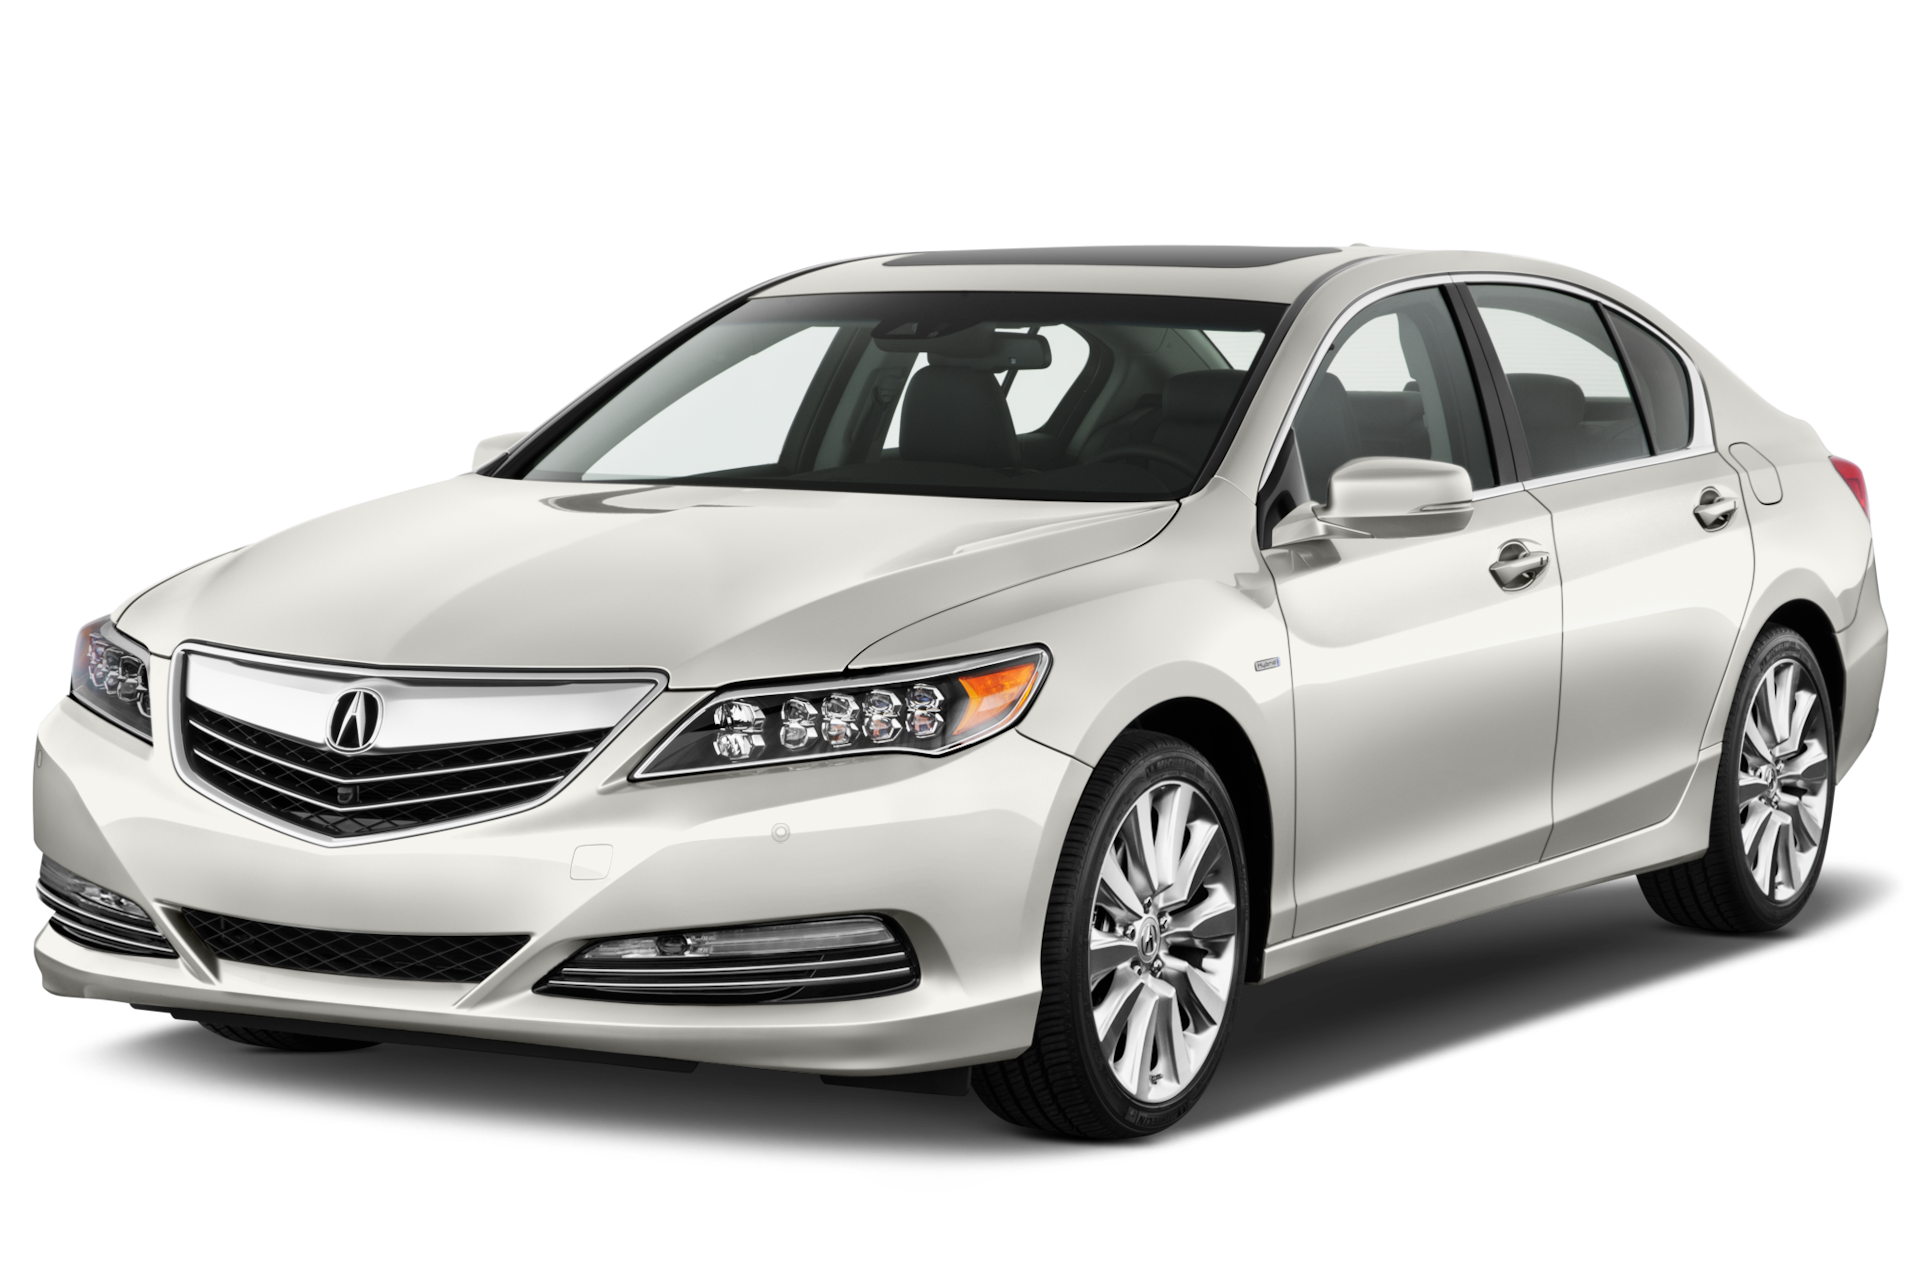 2016 Acura RLX Hybrid Prices, Reviews, and Photos - MotorTrend